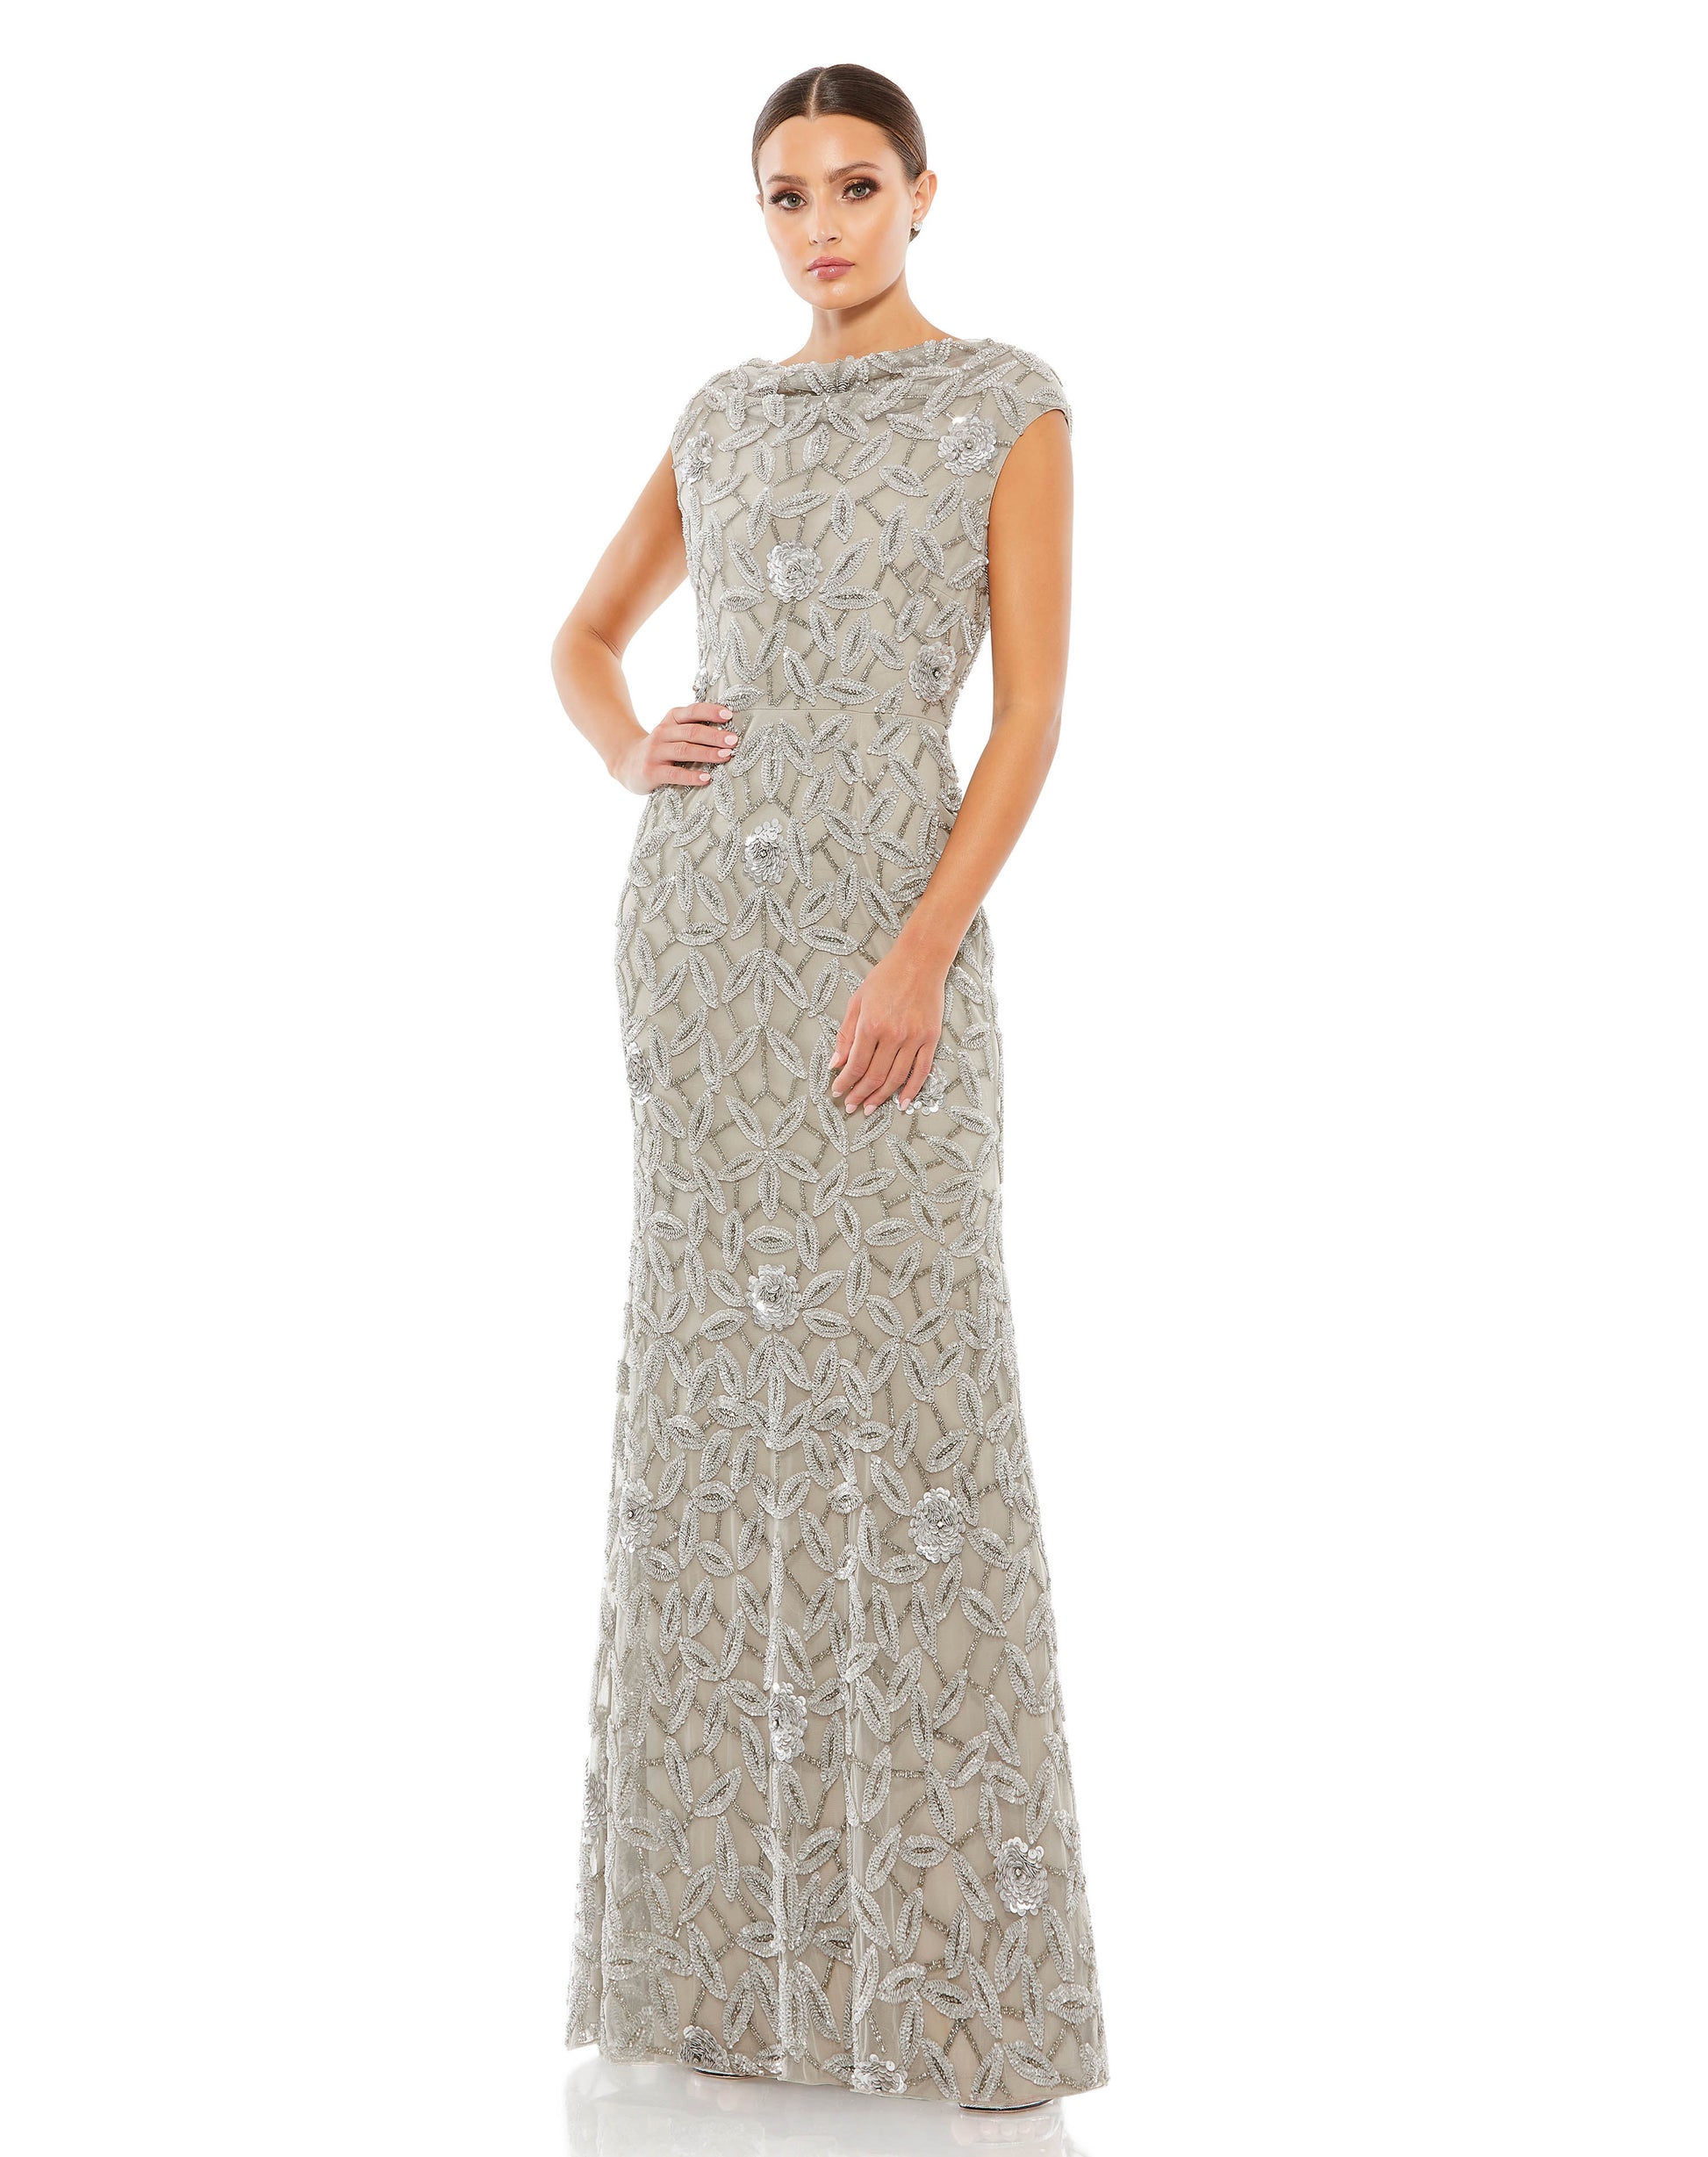 Mac Duggal Floral hand-embellished mesh overlay; 100% polyester lining Fully lined through body Cowl bateau neckline Scoop backline Cap sleeves Beaded throughout with hand-sequined 3D floral accents Concealed back zipper Approx. 62.5" from top of shoulder